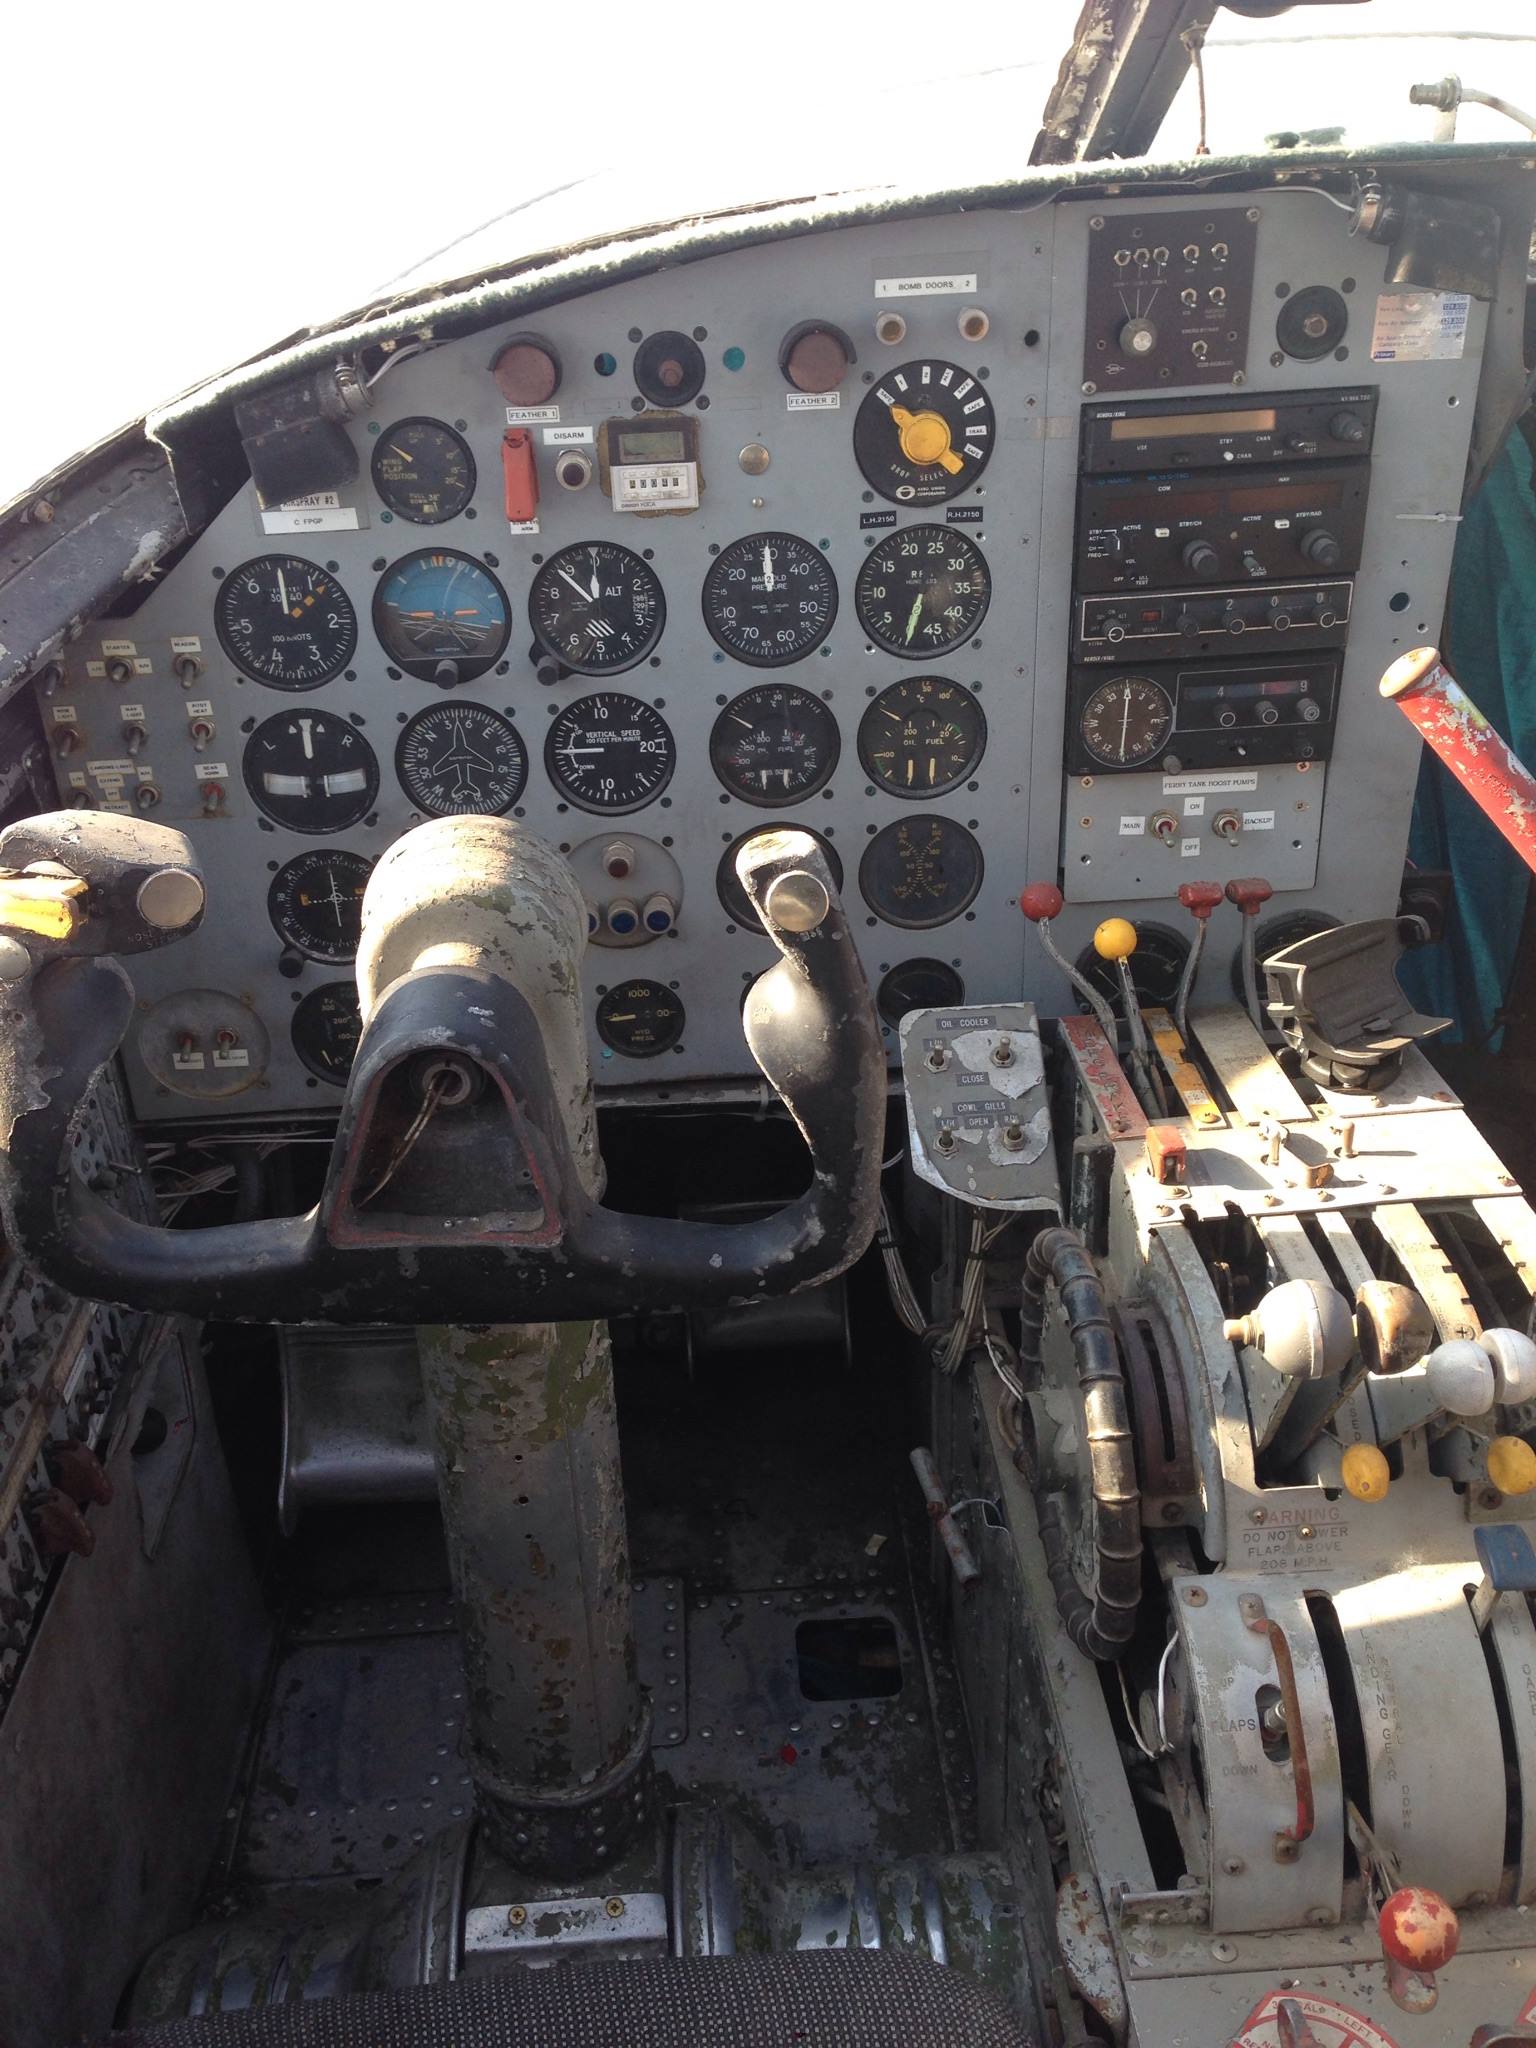 The Invader's main instrument panel. (Photo via Reevers)